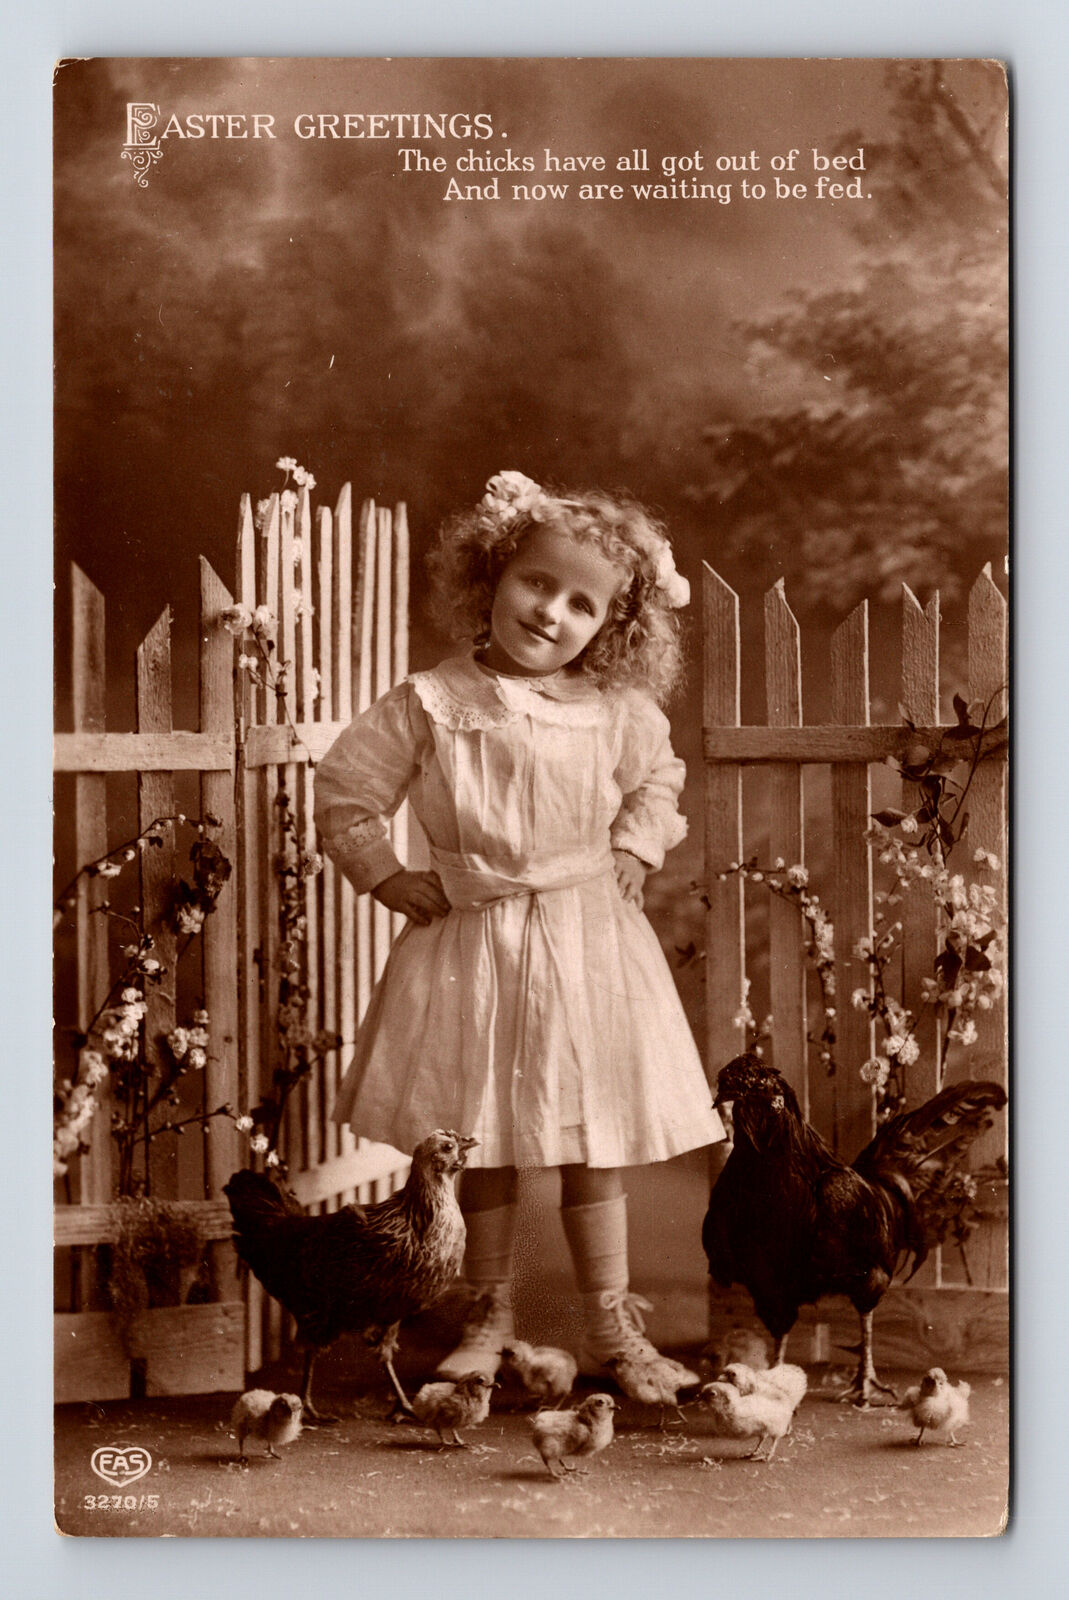 c1911 RPPC EAS Studio Portrait of Young Girl Chickens Easter Greetings Postcard